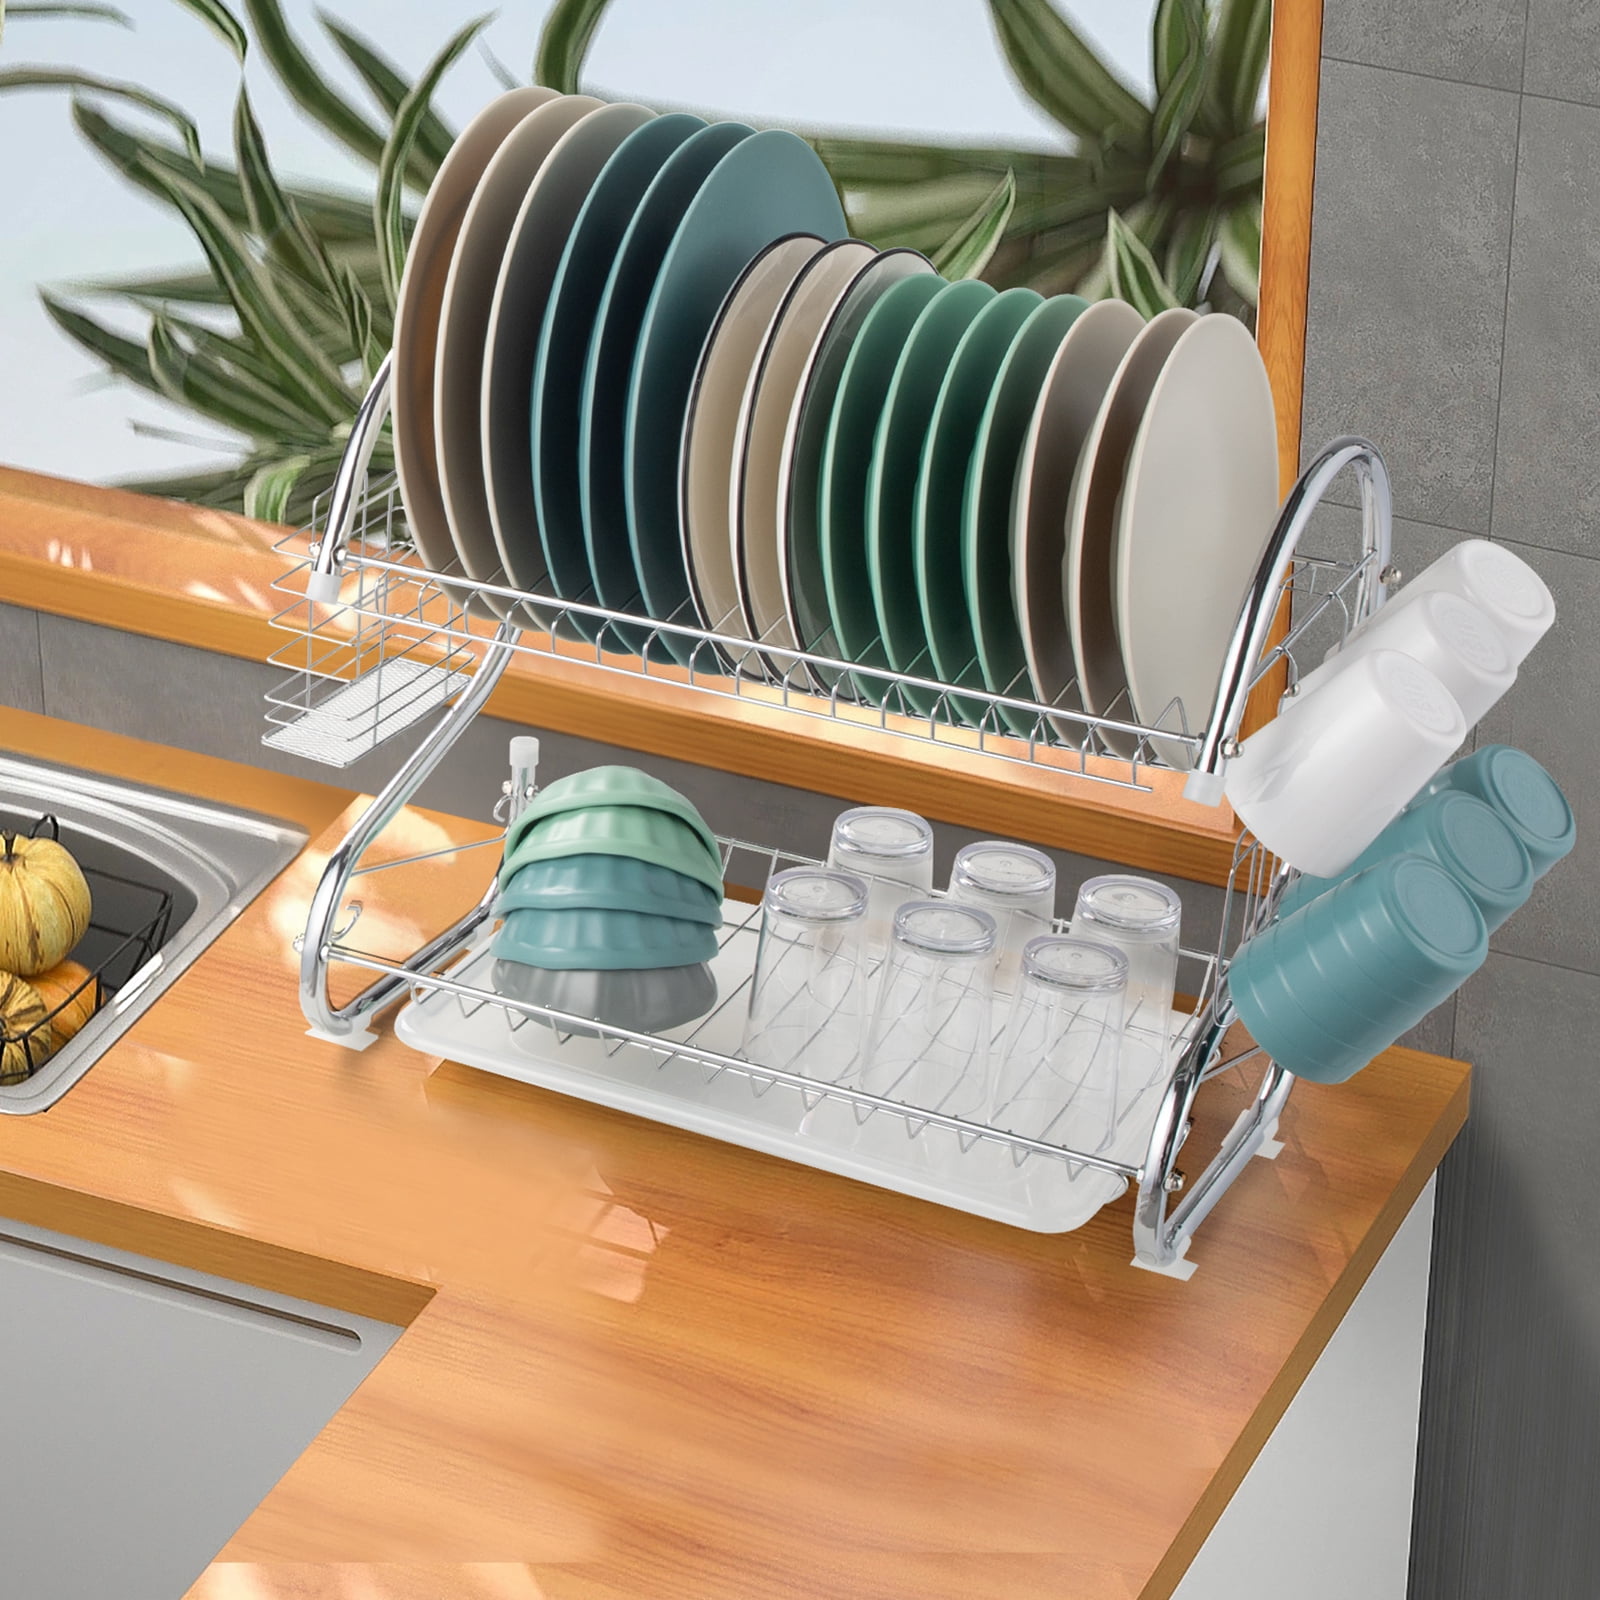 DUANFEE Dish Drying Rack - 2 Tier Small Dish Racks for Kitchen Counter,  Dish Drainer with Utensil Holder, Glass Holder and Drainboard,  Multifunctional